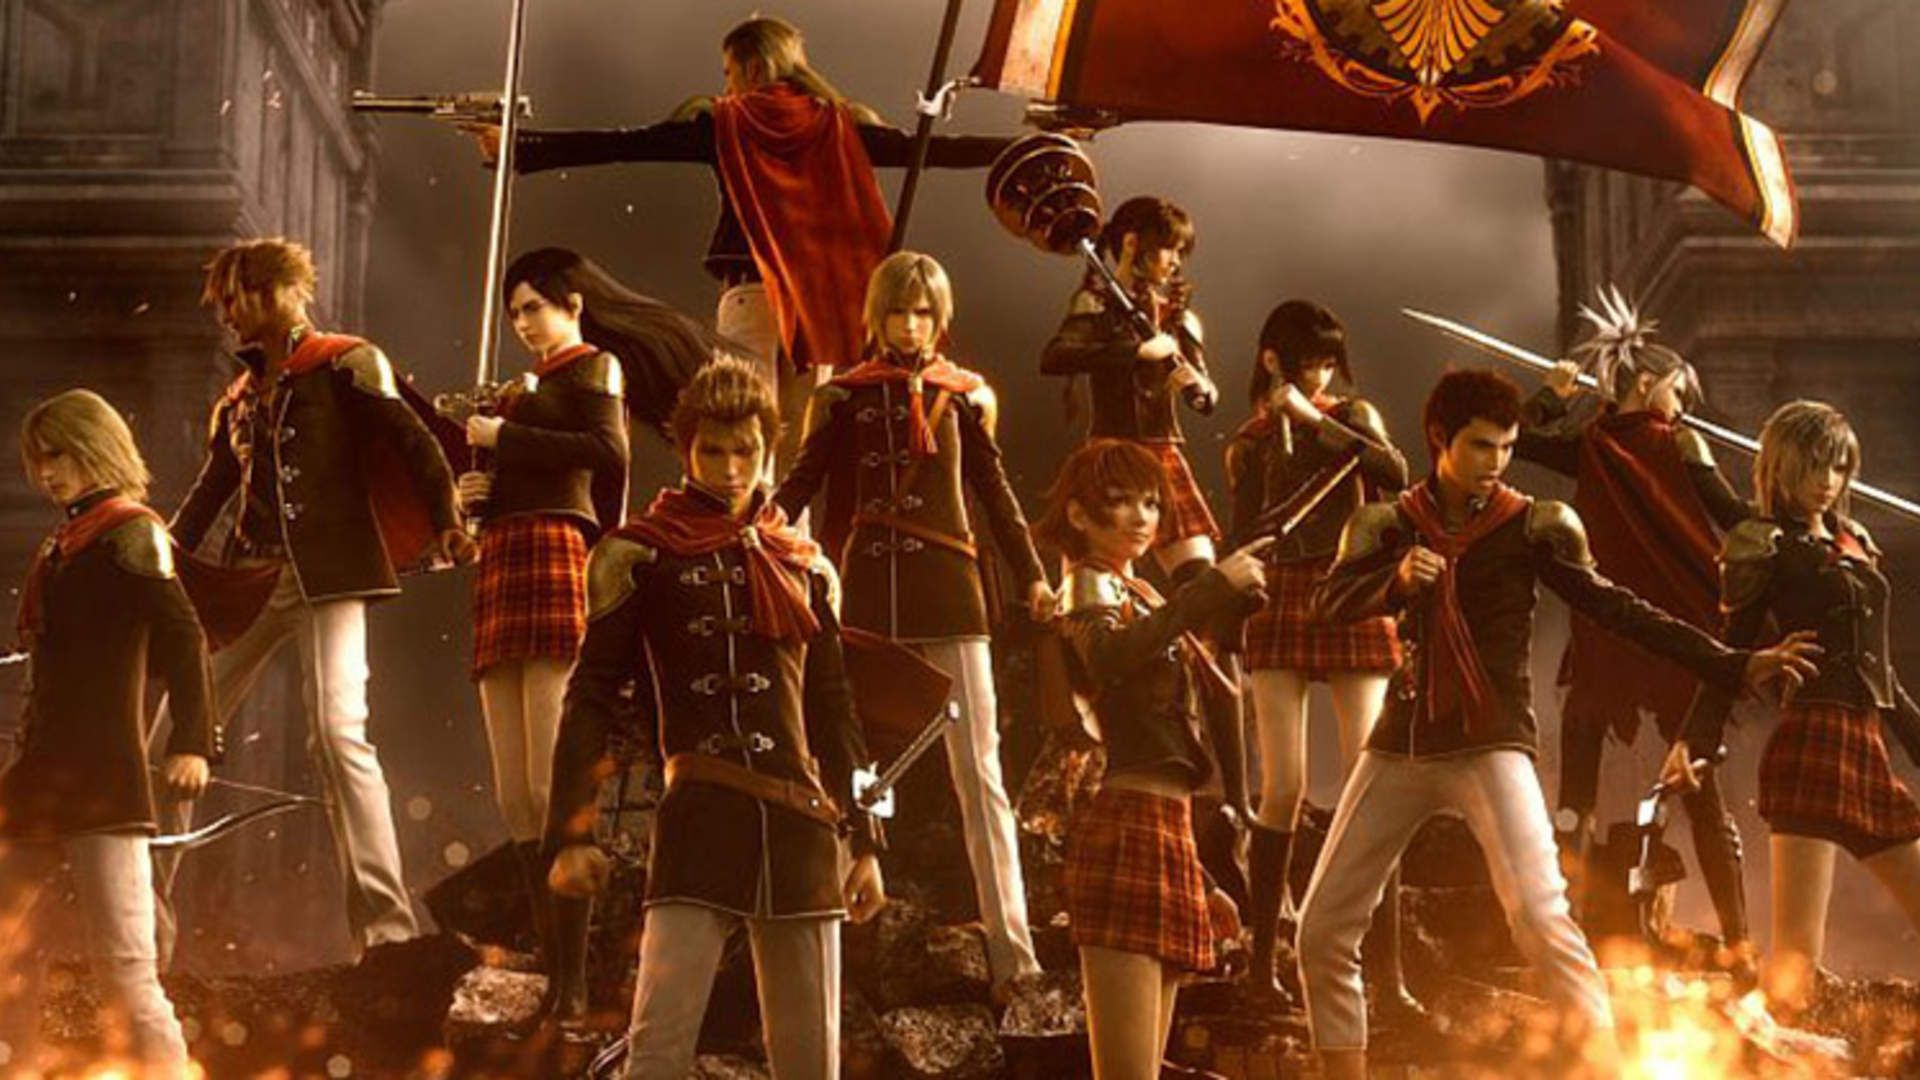 Final Fantasy Type 0 HD Review: For Old Times' Sake